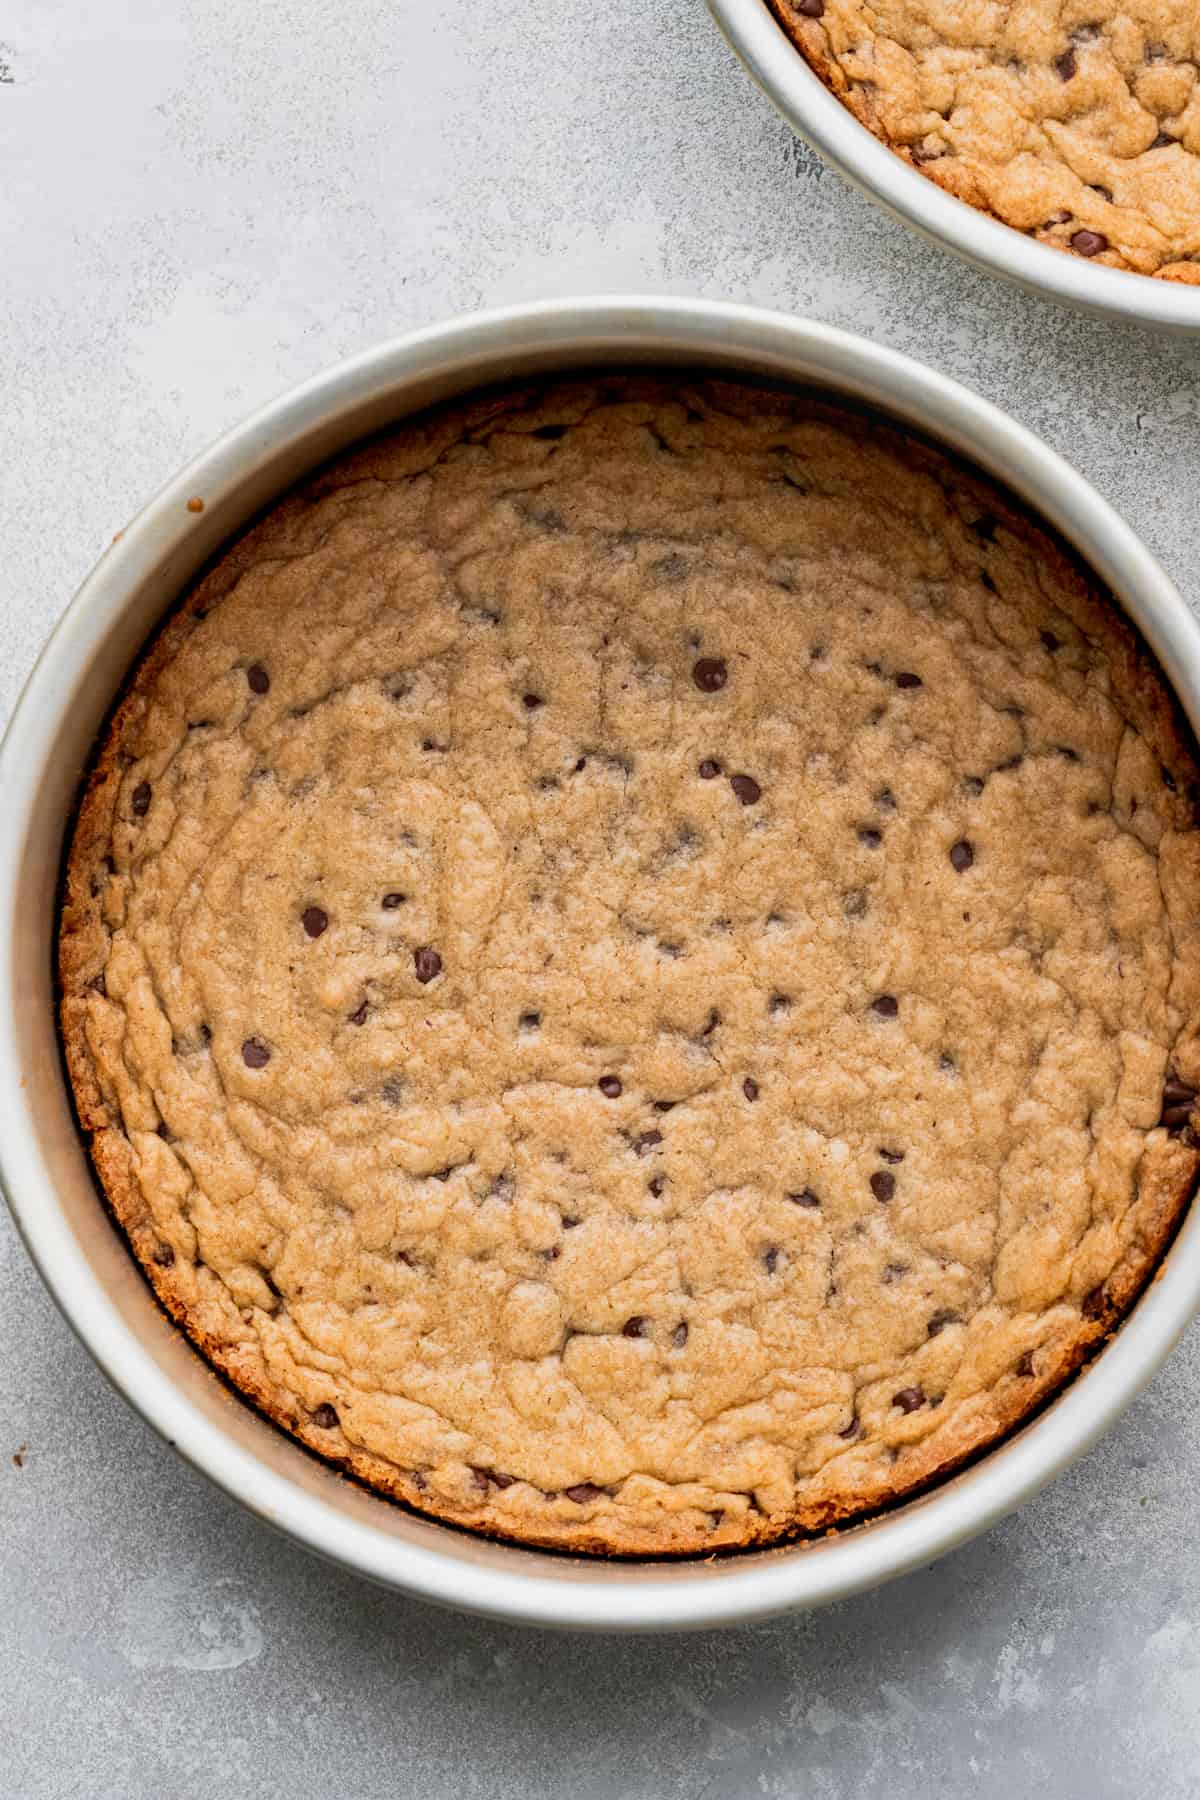 Baked cookie in a cake pan.